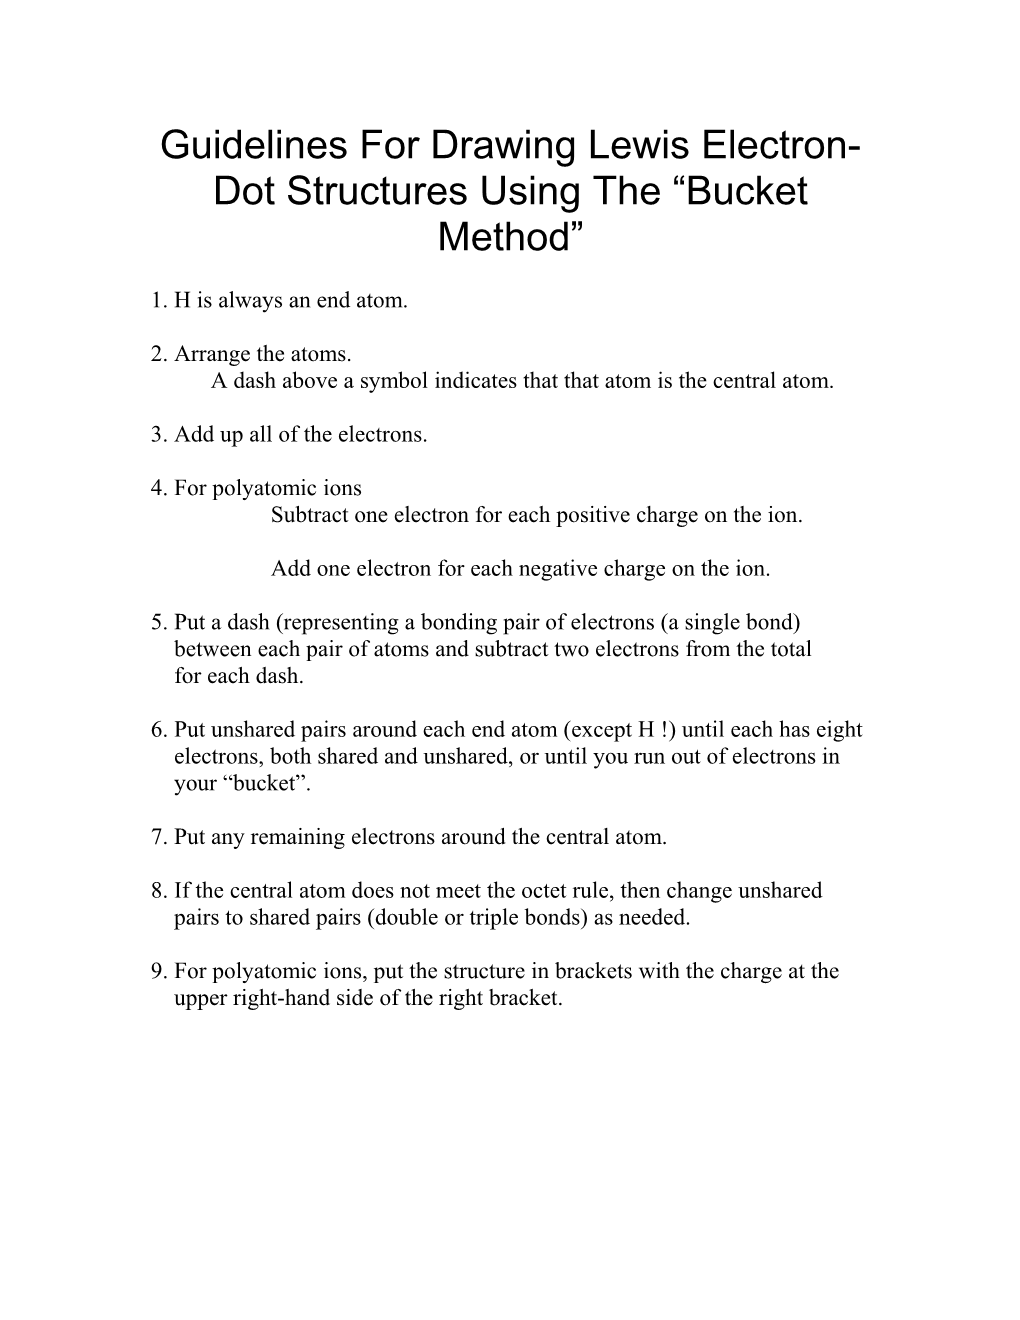 Guidelines for Drawing Lewis Electron-Dot Structures Using the Bucket Method